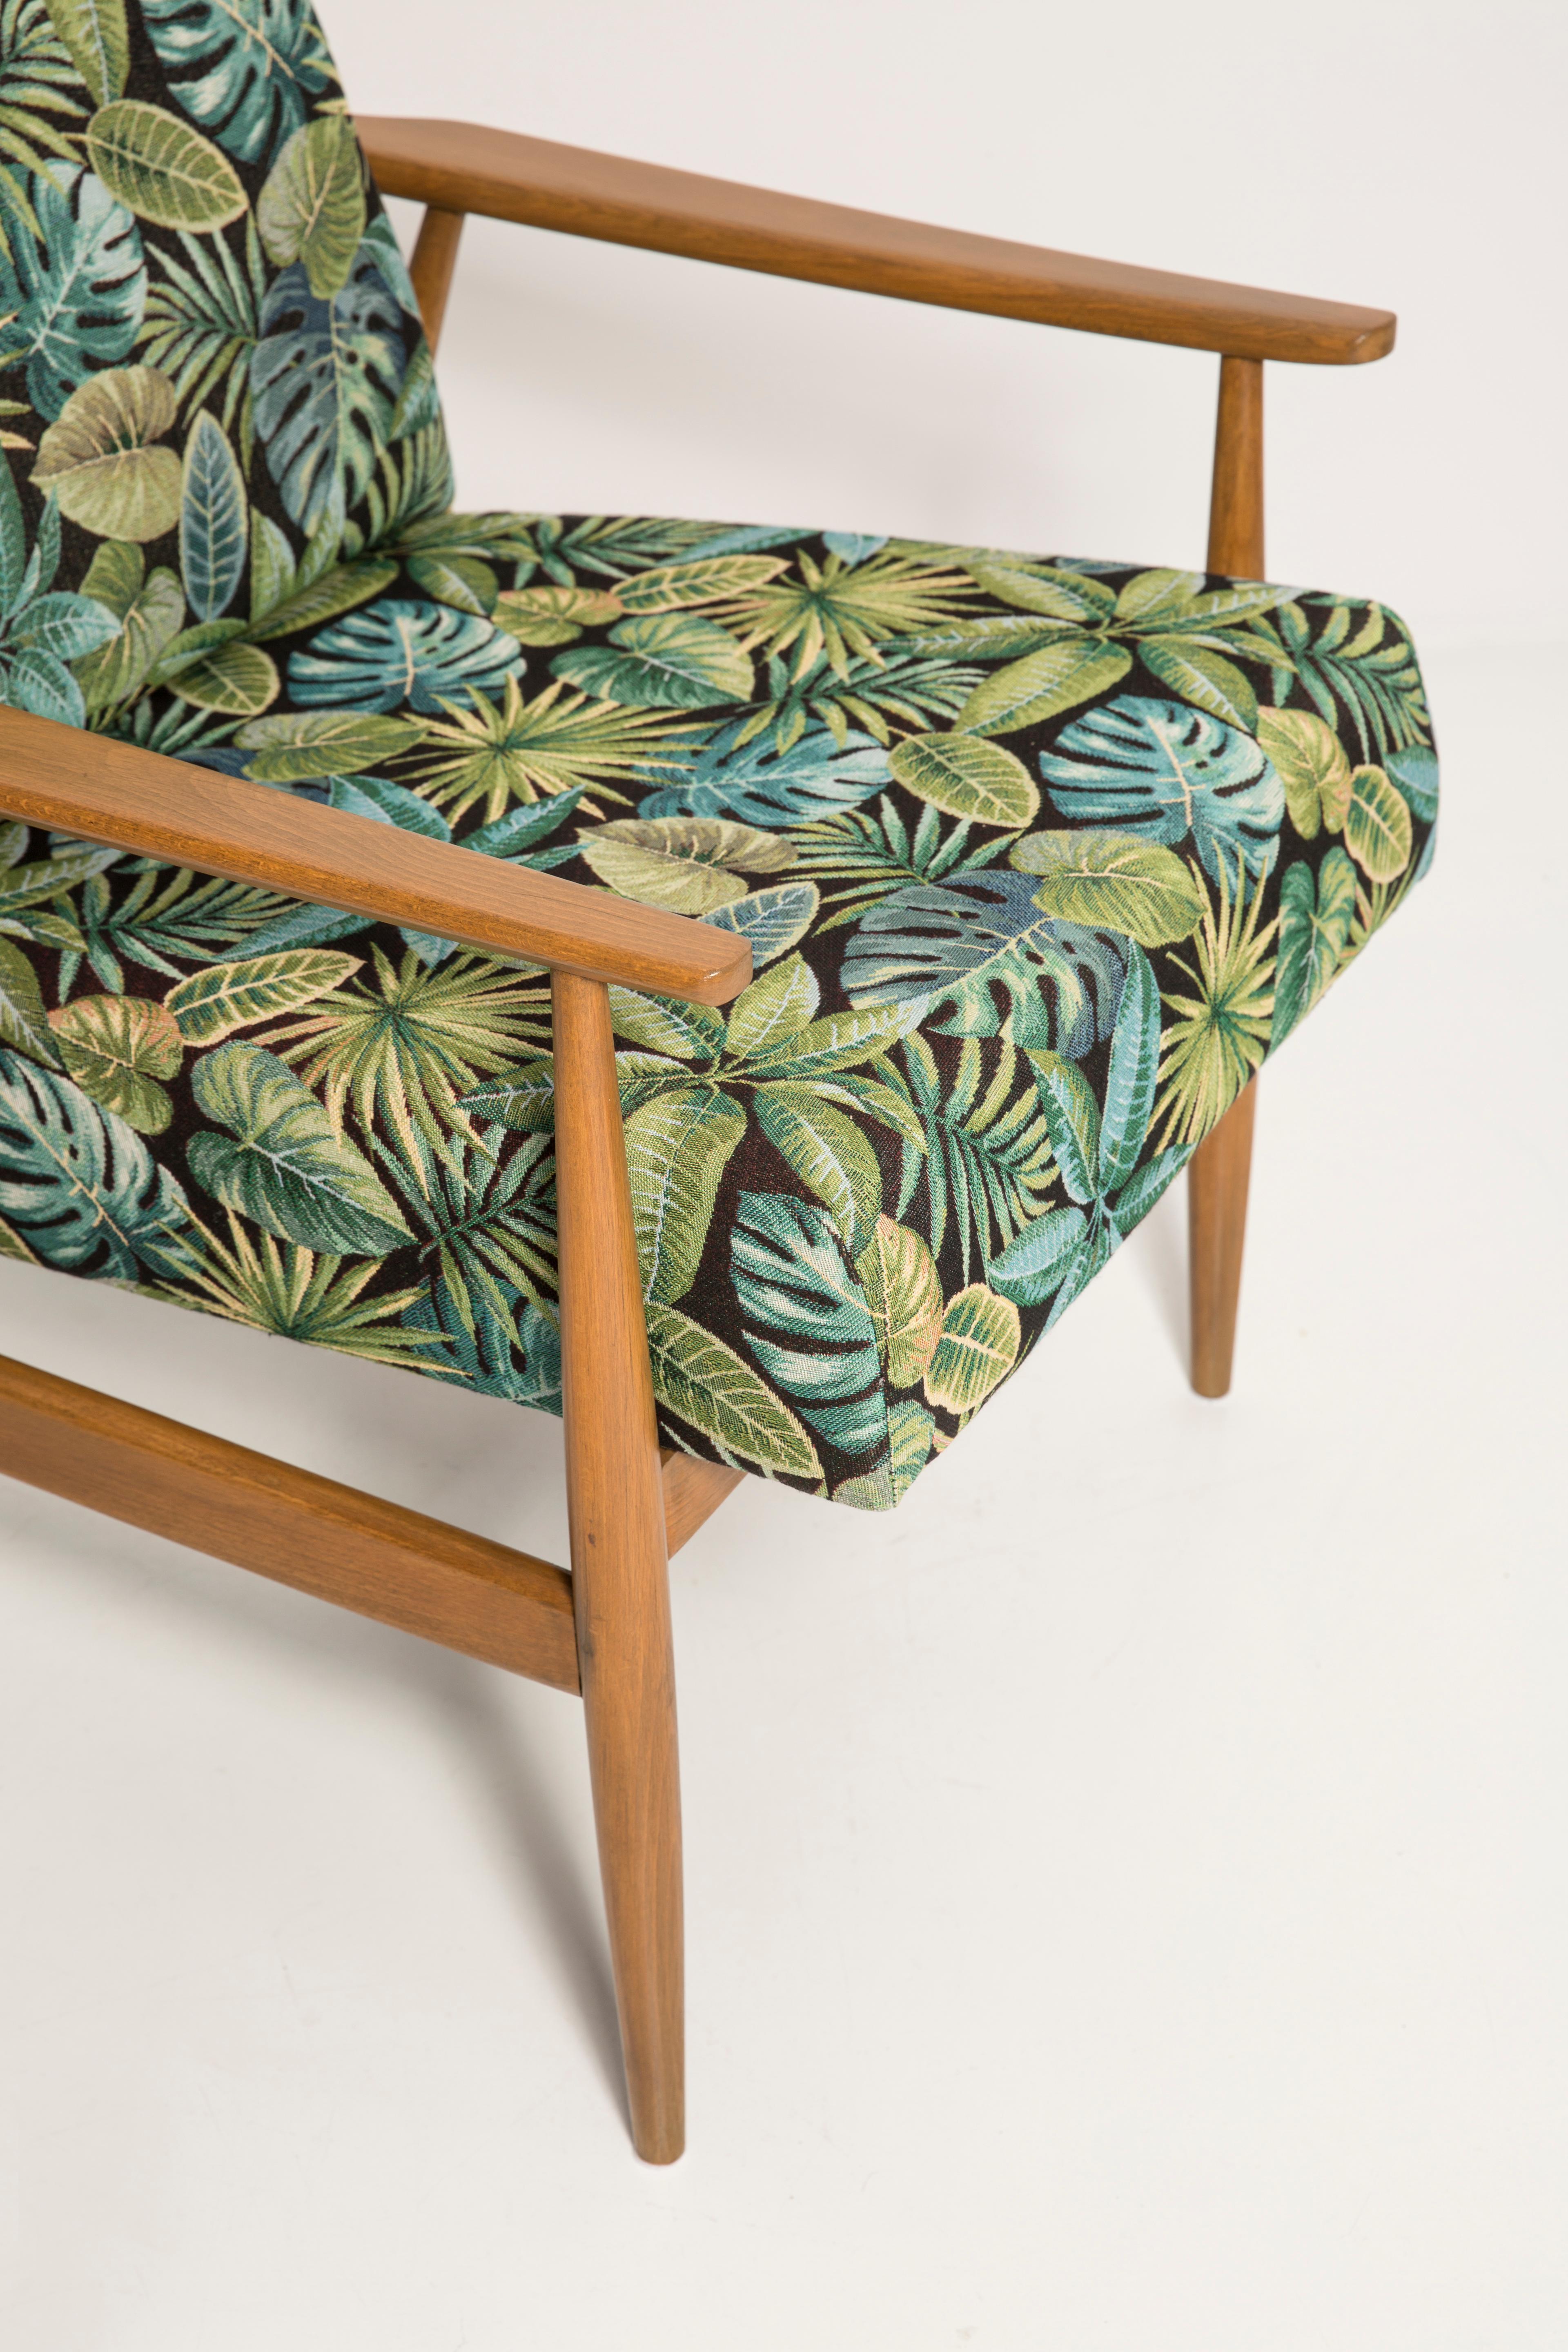 Mid-Century Green Leaves Jacquard Dante Armchair, H. Lis, 1960s For Sale 1